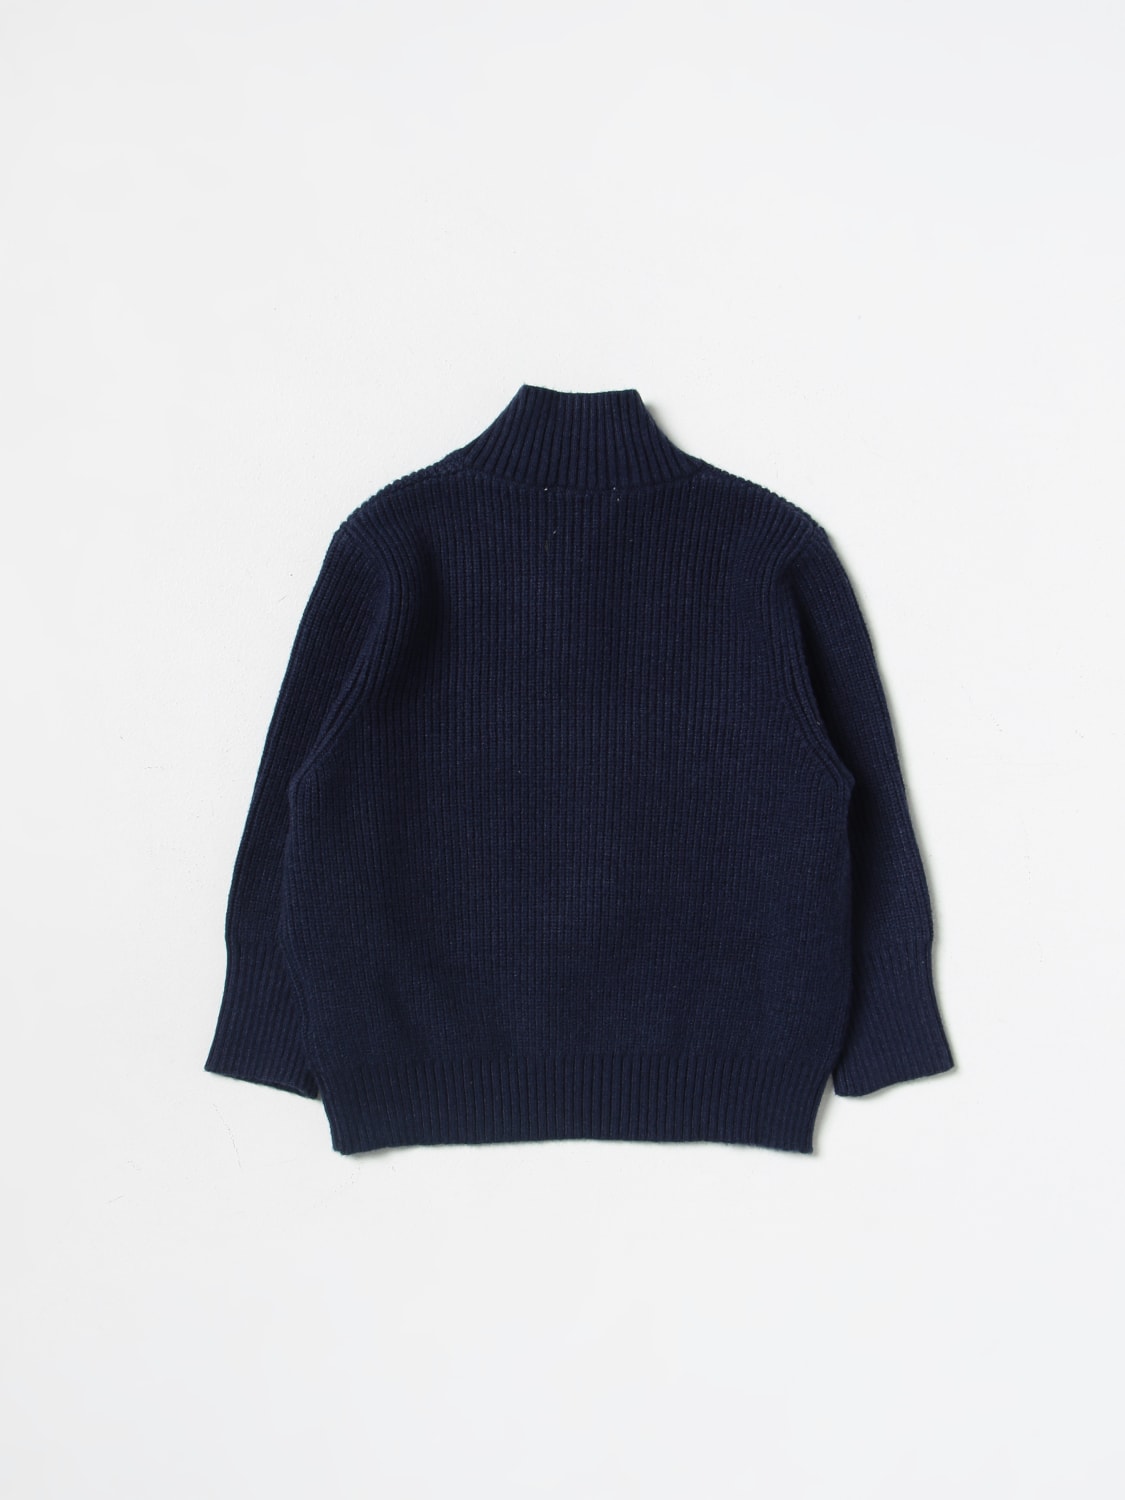 LITTLE MARC JACOBS: sweater for girls - Blue | Little Marc Jacobs ...